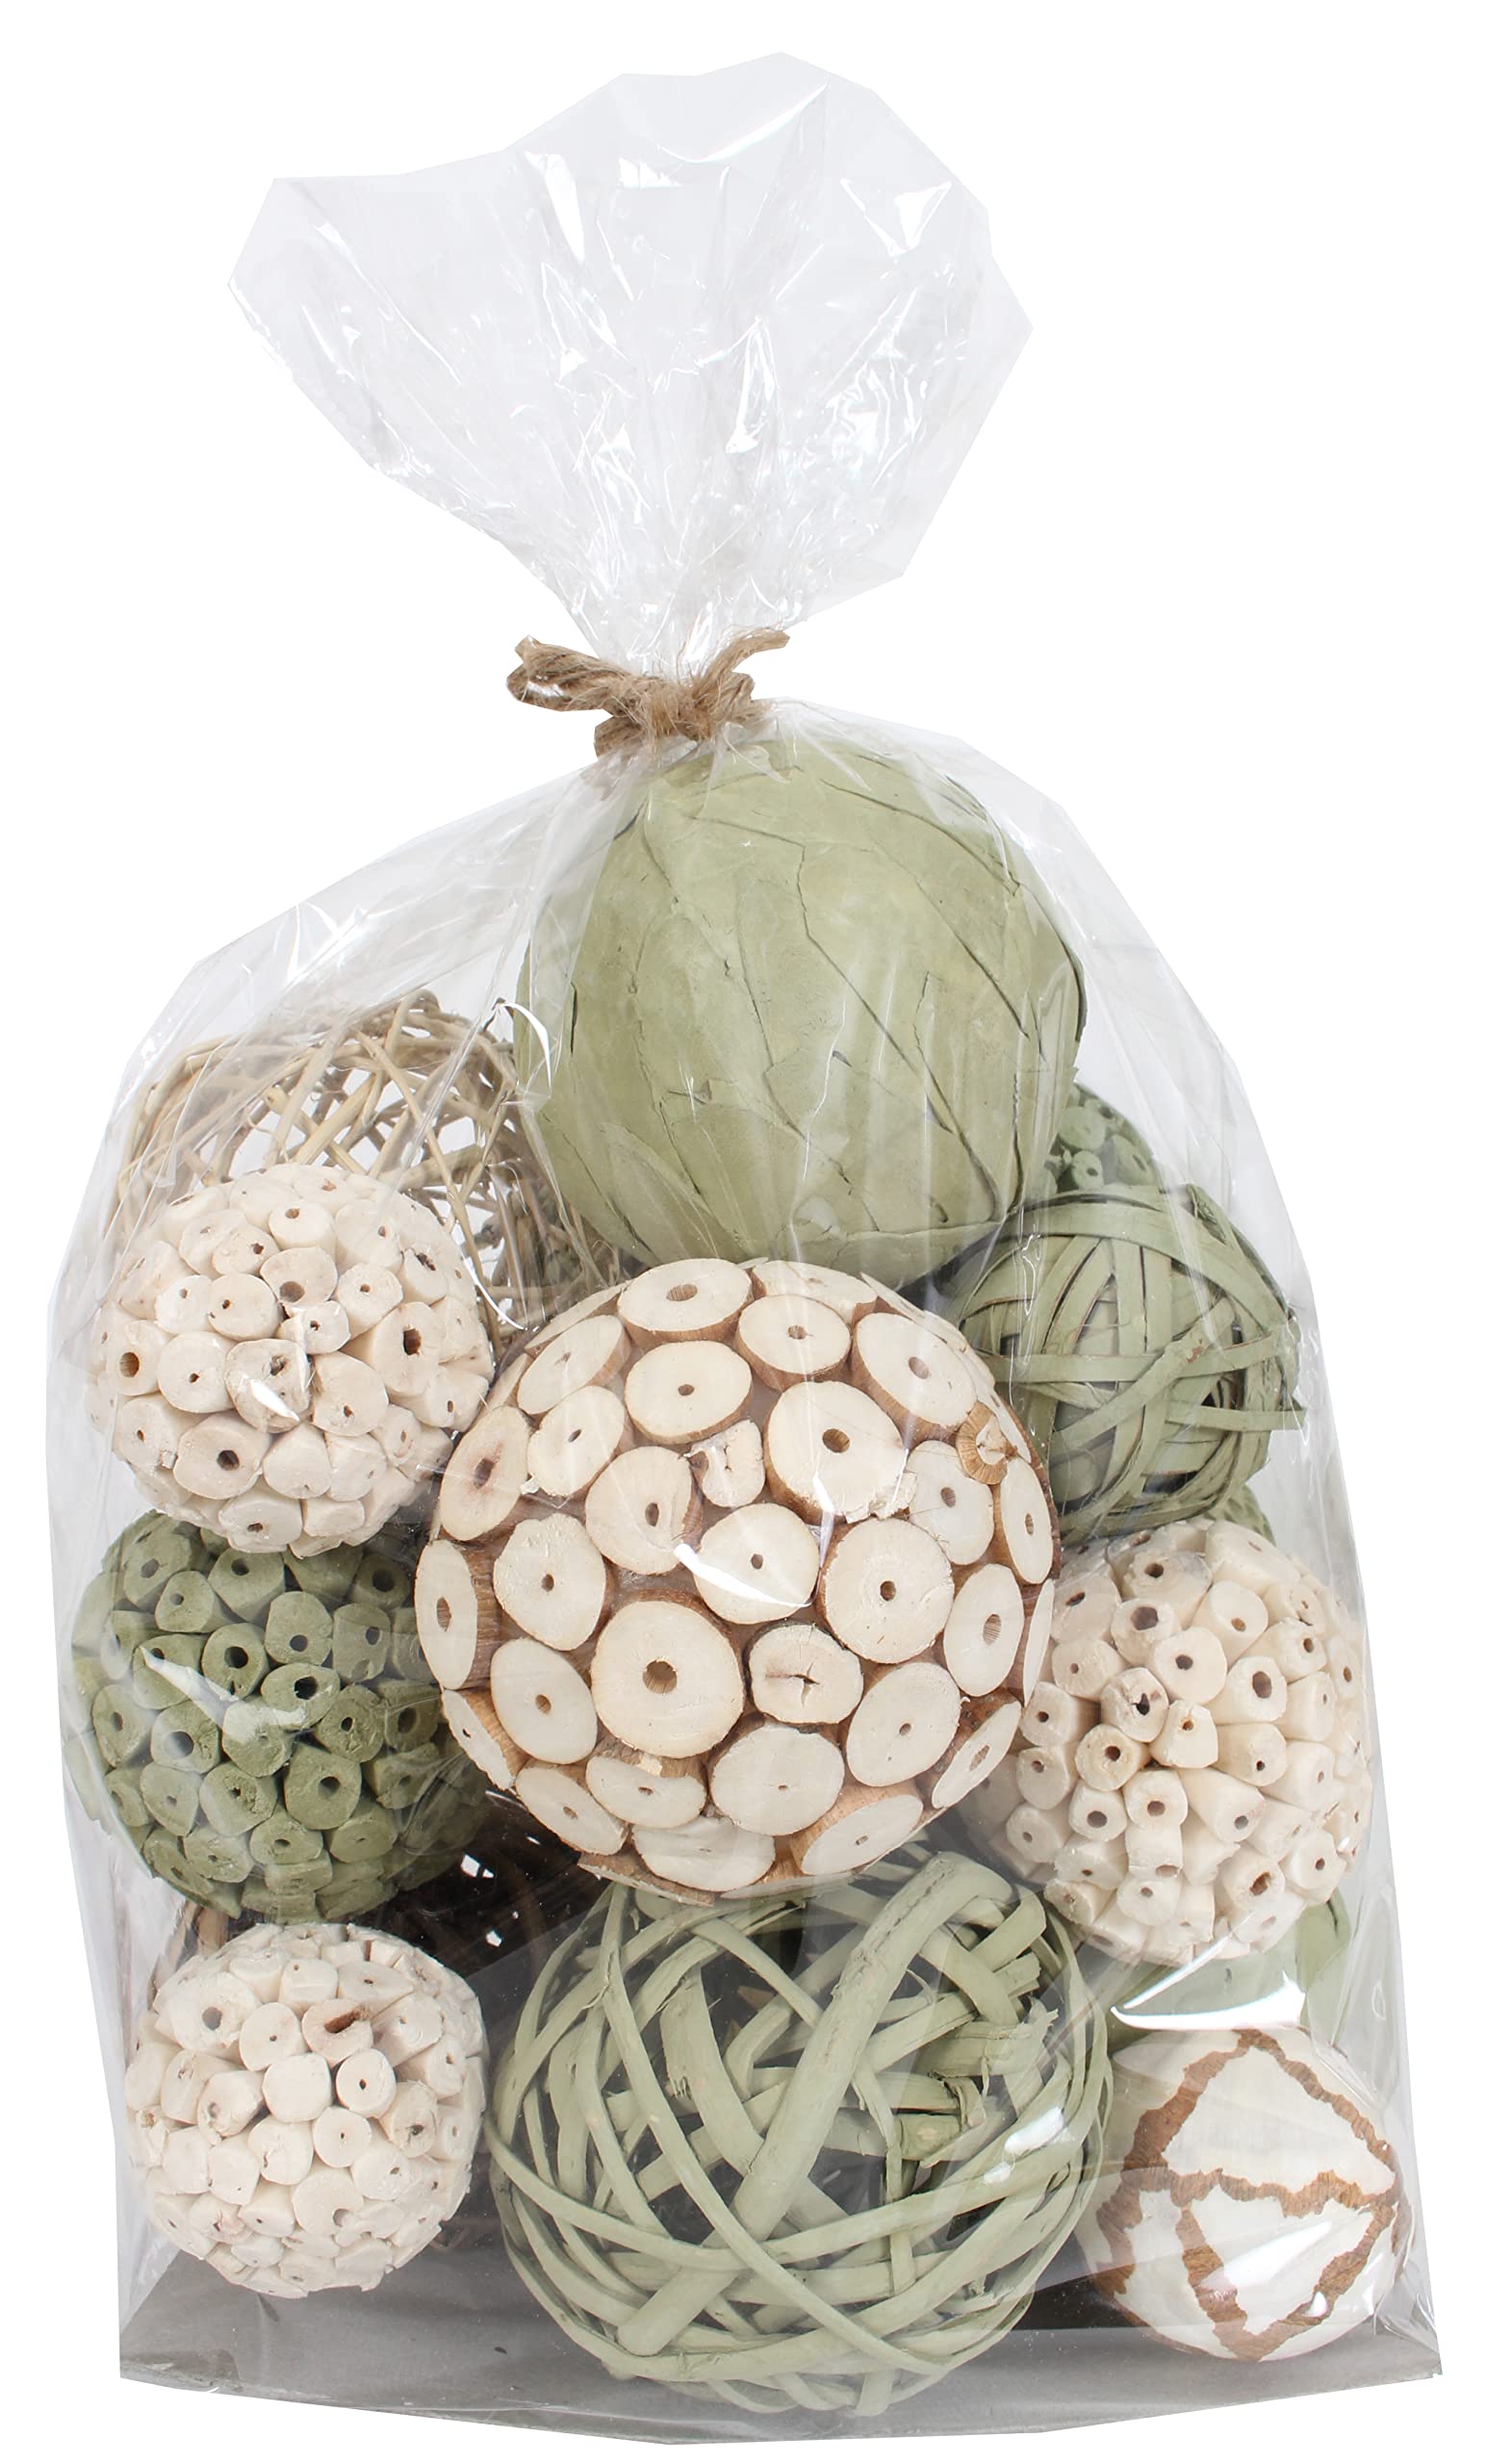 RULU Dried Exotics Orbs/Balls/Spheres Bowl and Vase Fillers 12